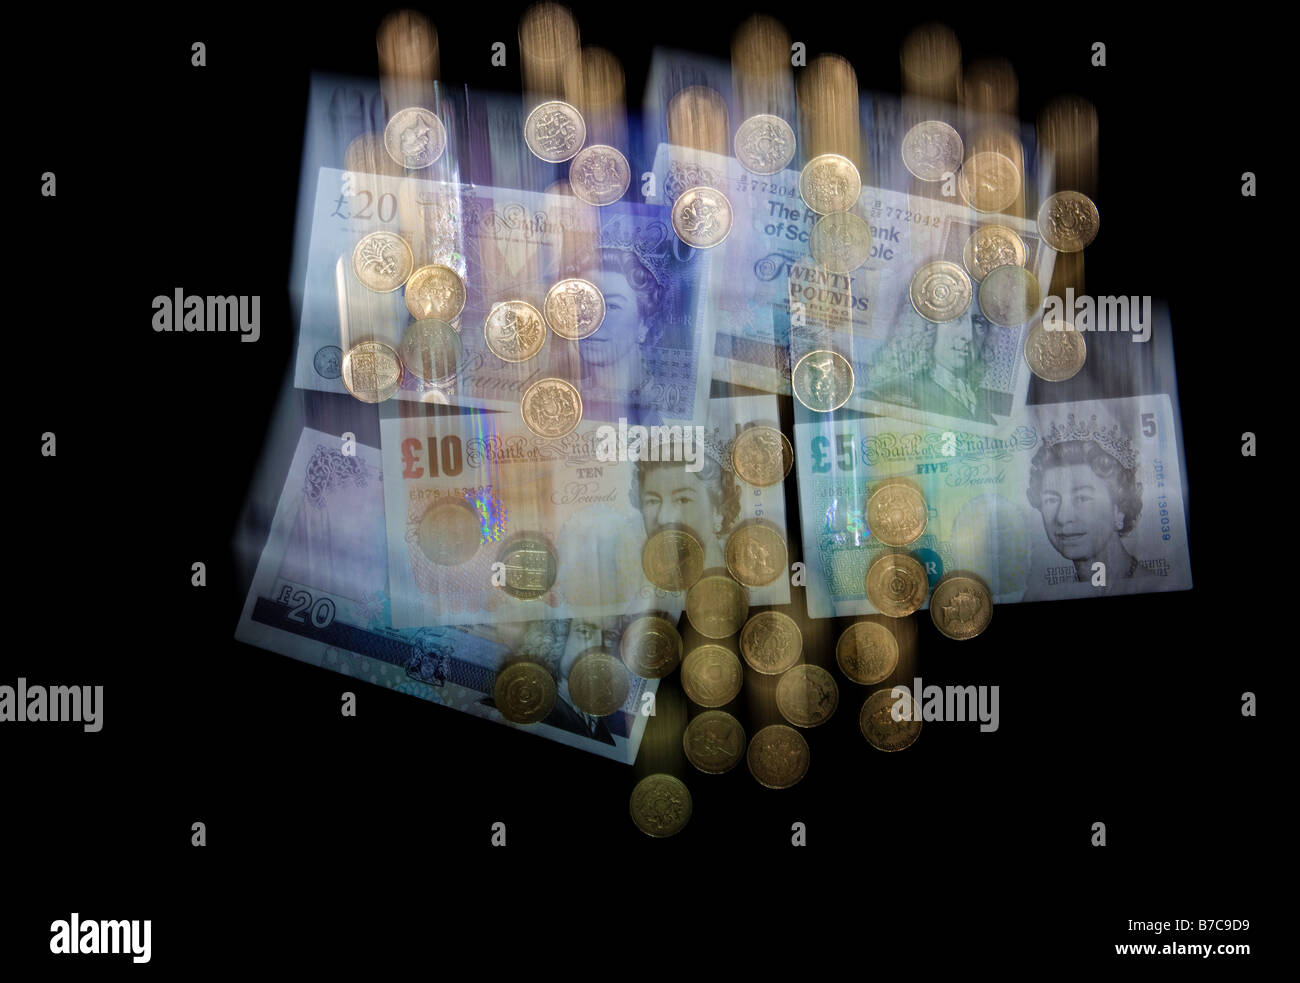 Falling blurred UK currency money, banknotes and pound coins sterling to illustrate the falling pound Stock Photo